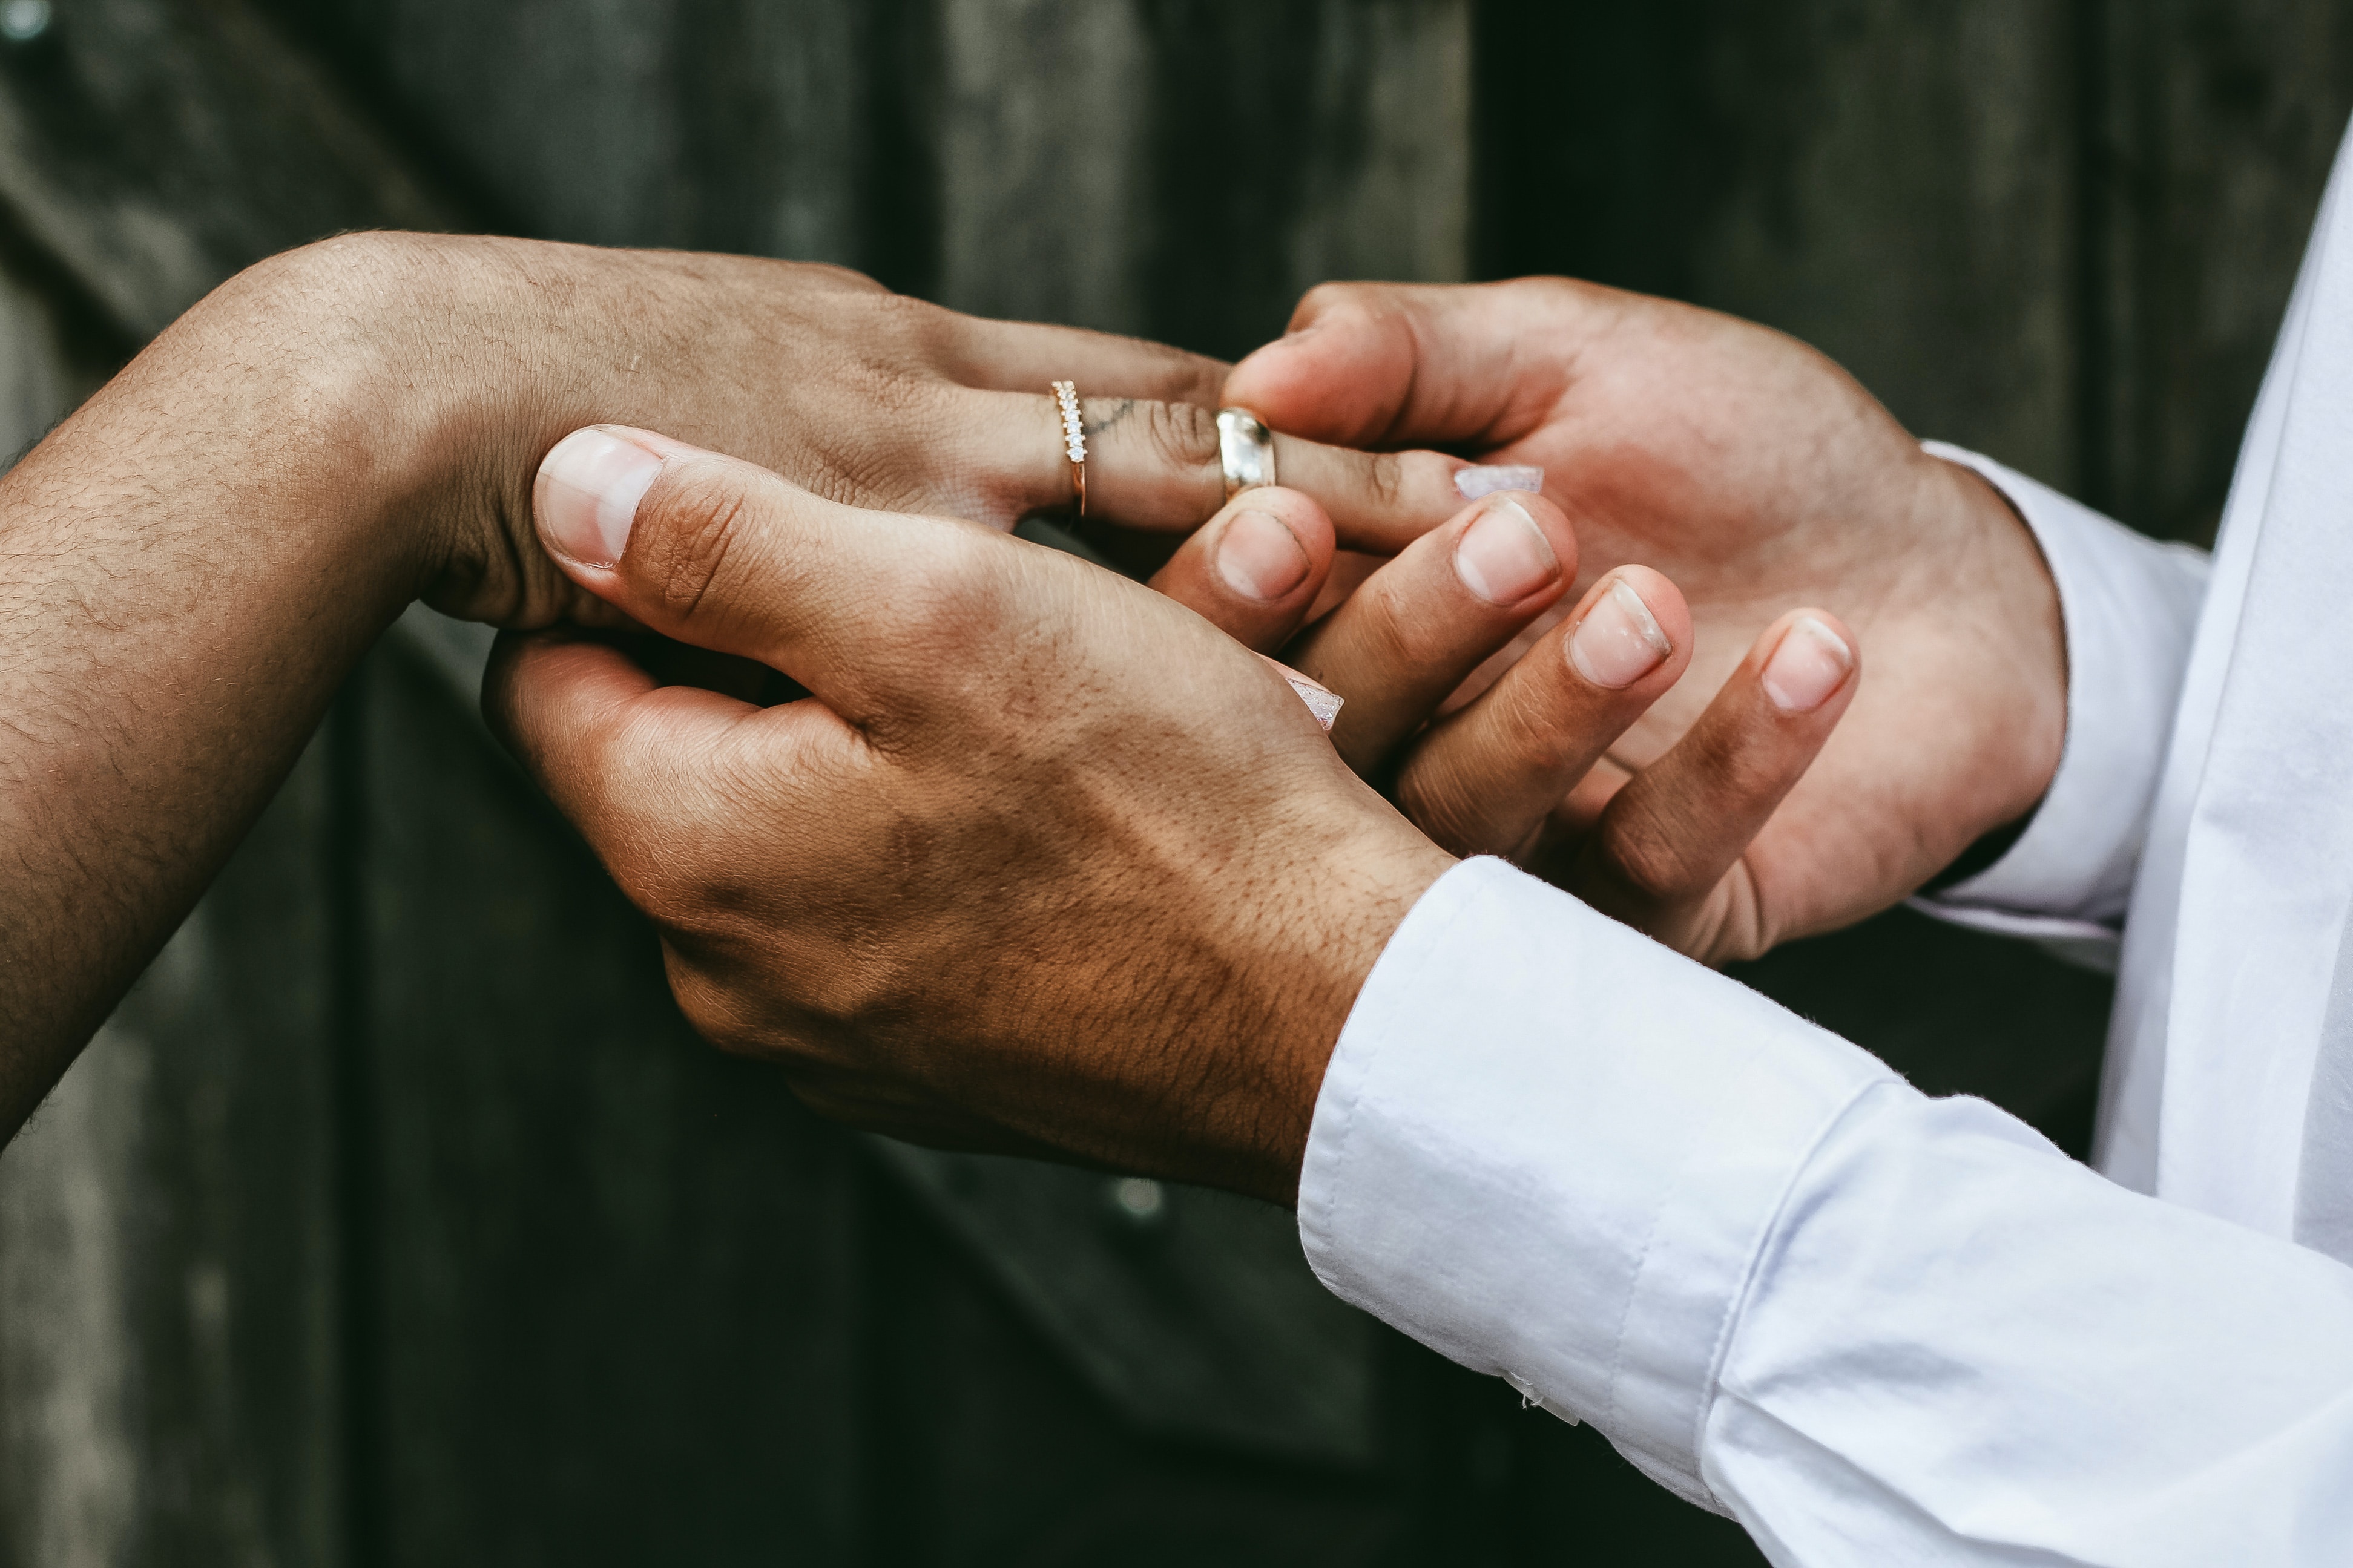 A couple holding hands and showing their rings after getting married.